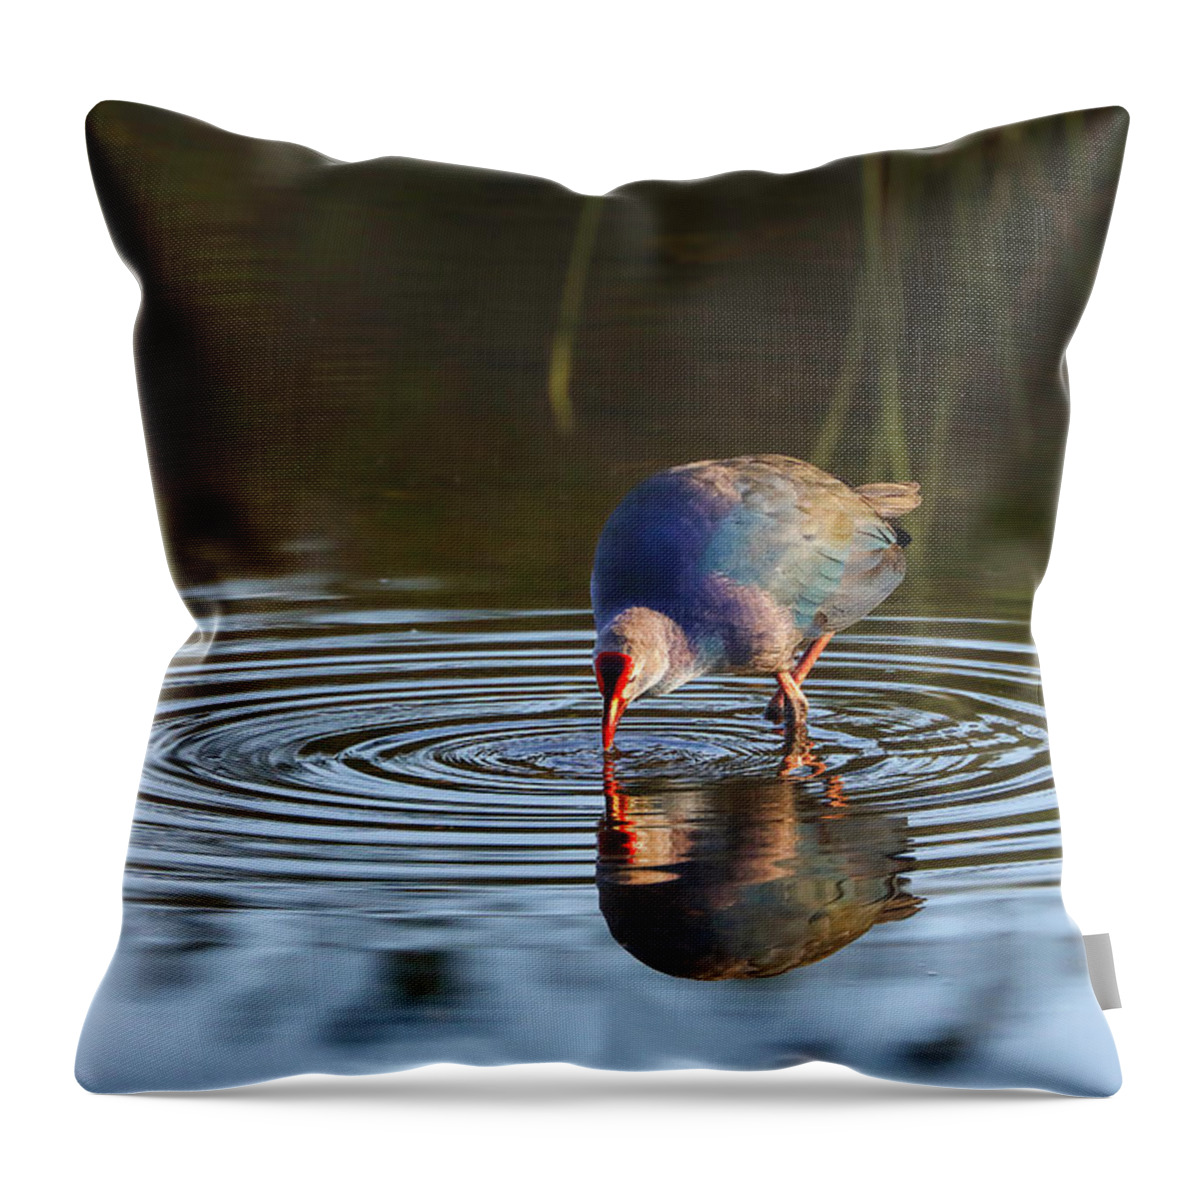 Swamphen Throw Pillow featuring the photograph Swamphen by Juergen Roth